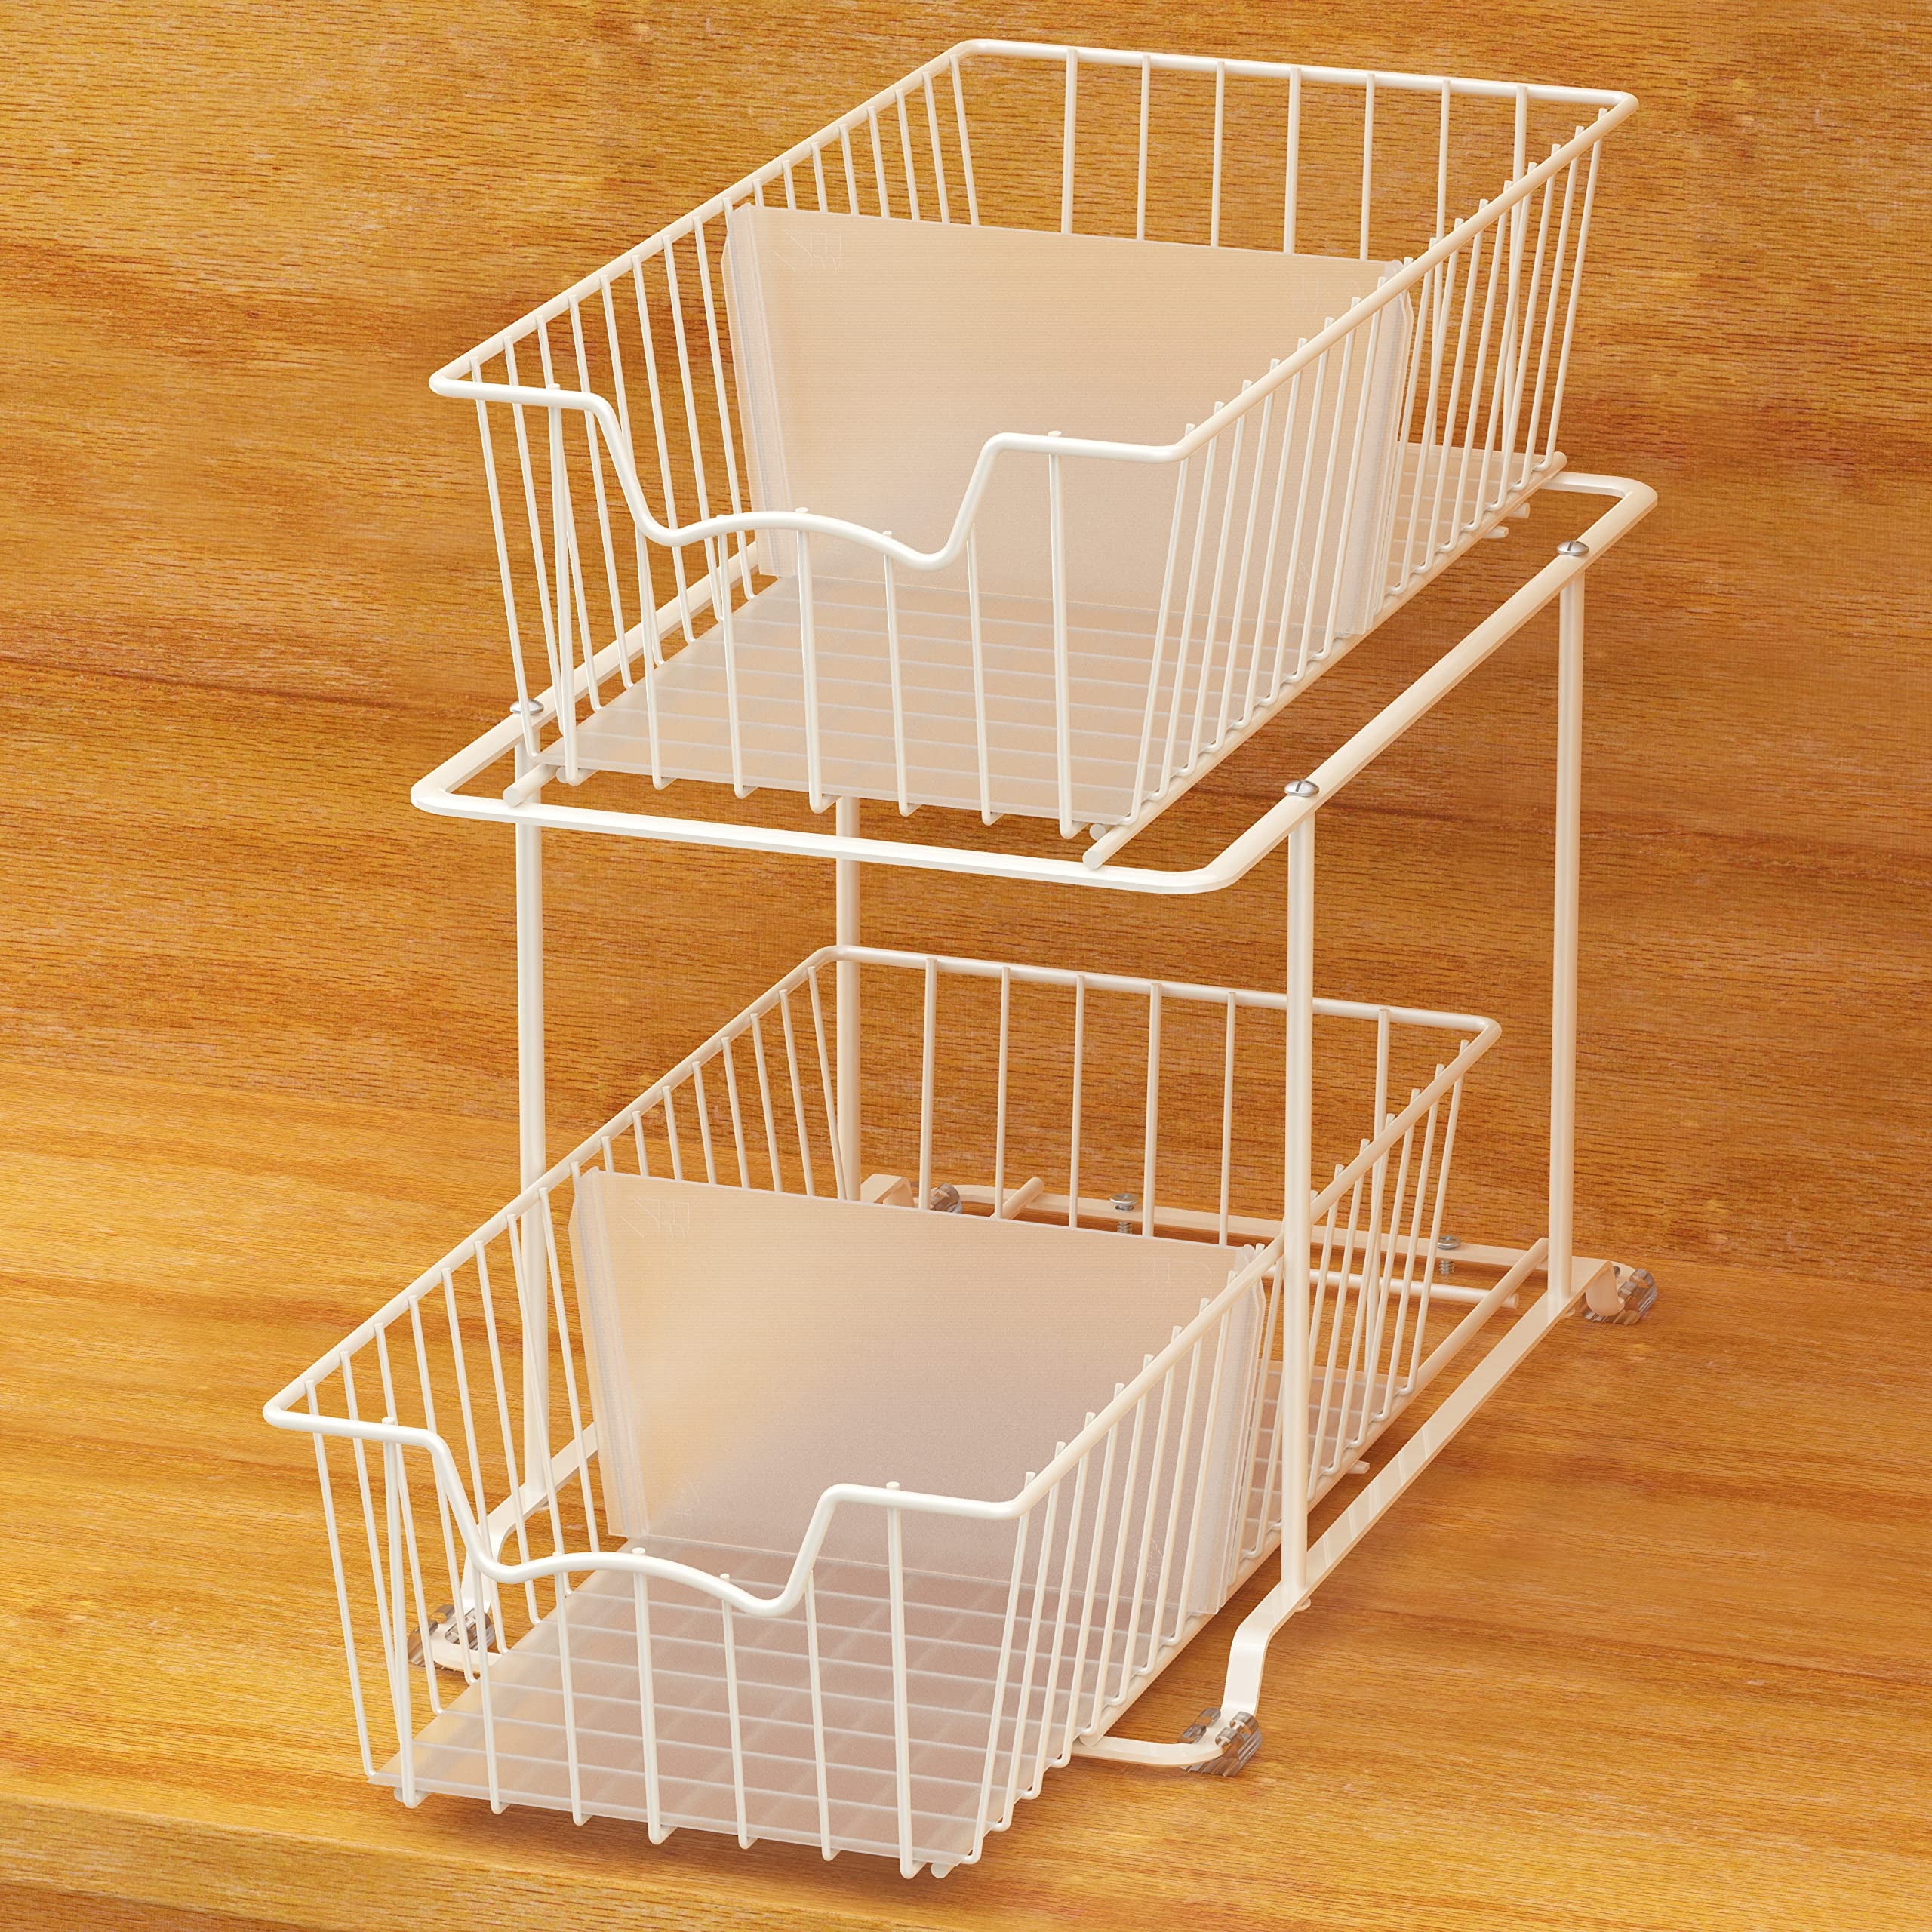 Mainstays Wire 6-Piece Organizing Set, Cabinet and Pantry